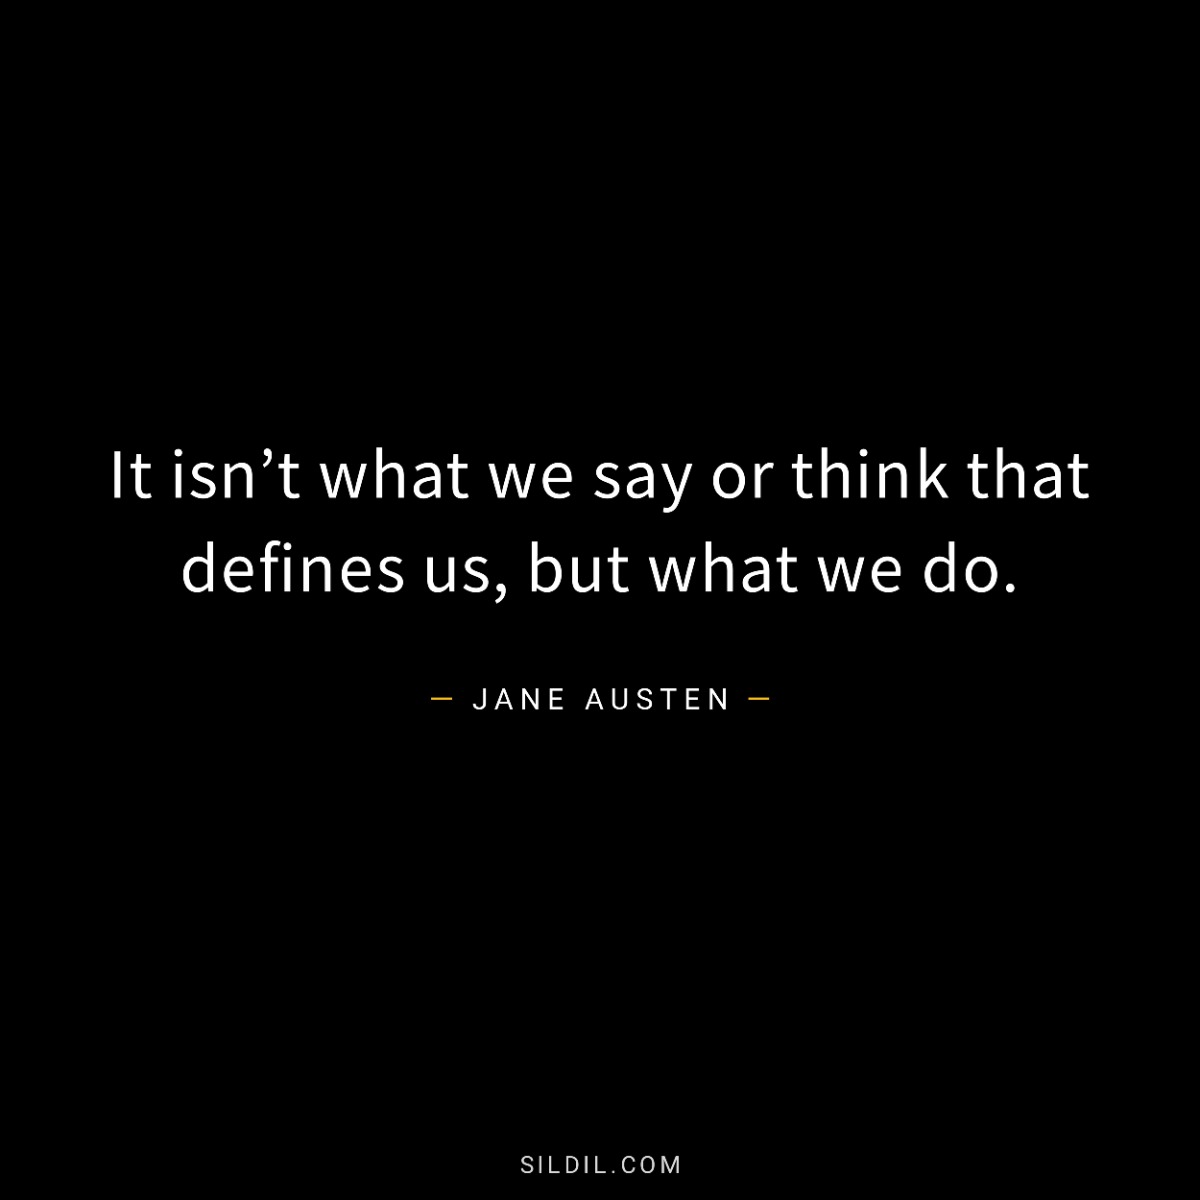 It isn’t what we say or think that defines us, but what we do.